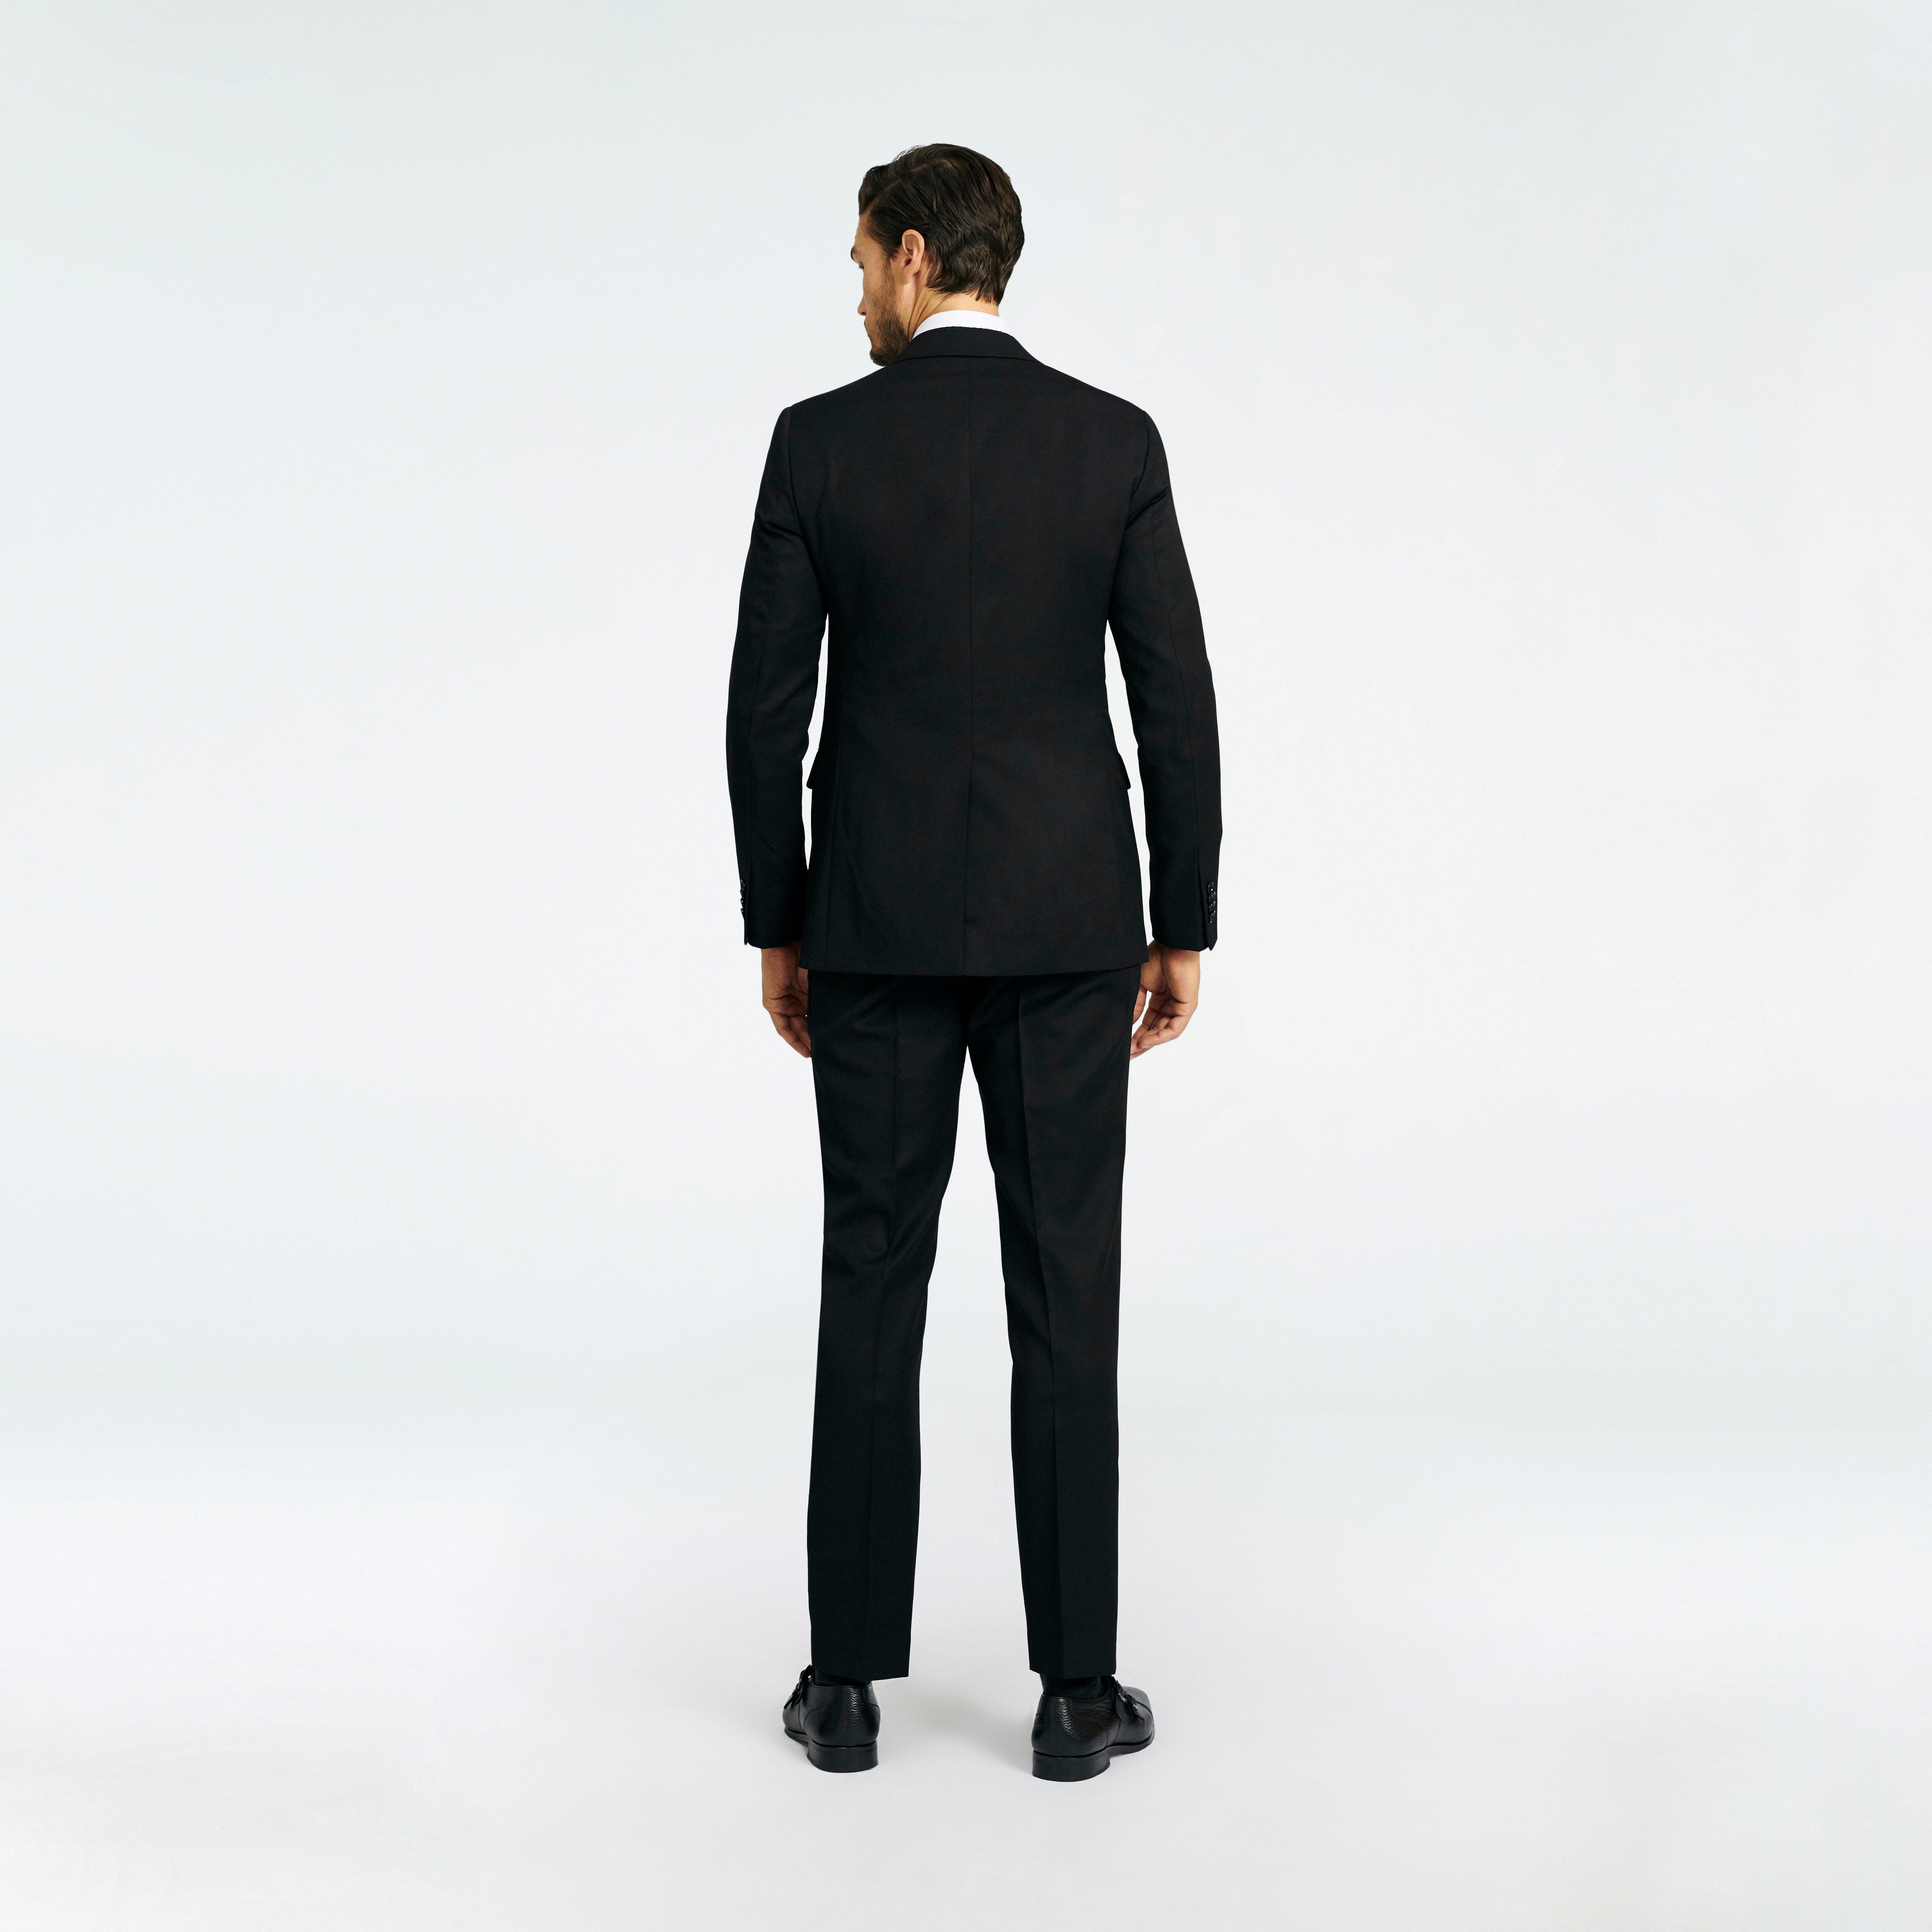 Hereford Cavalry Twill Black Suit